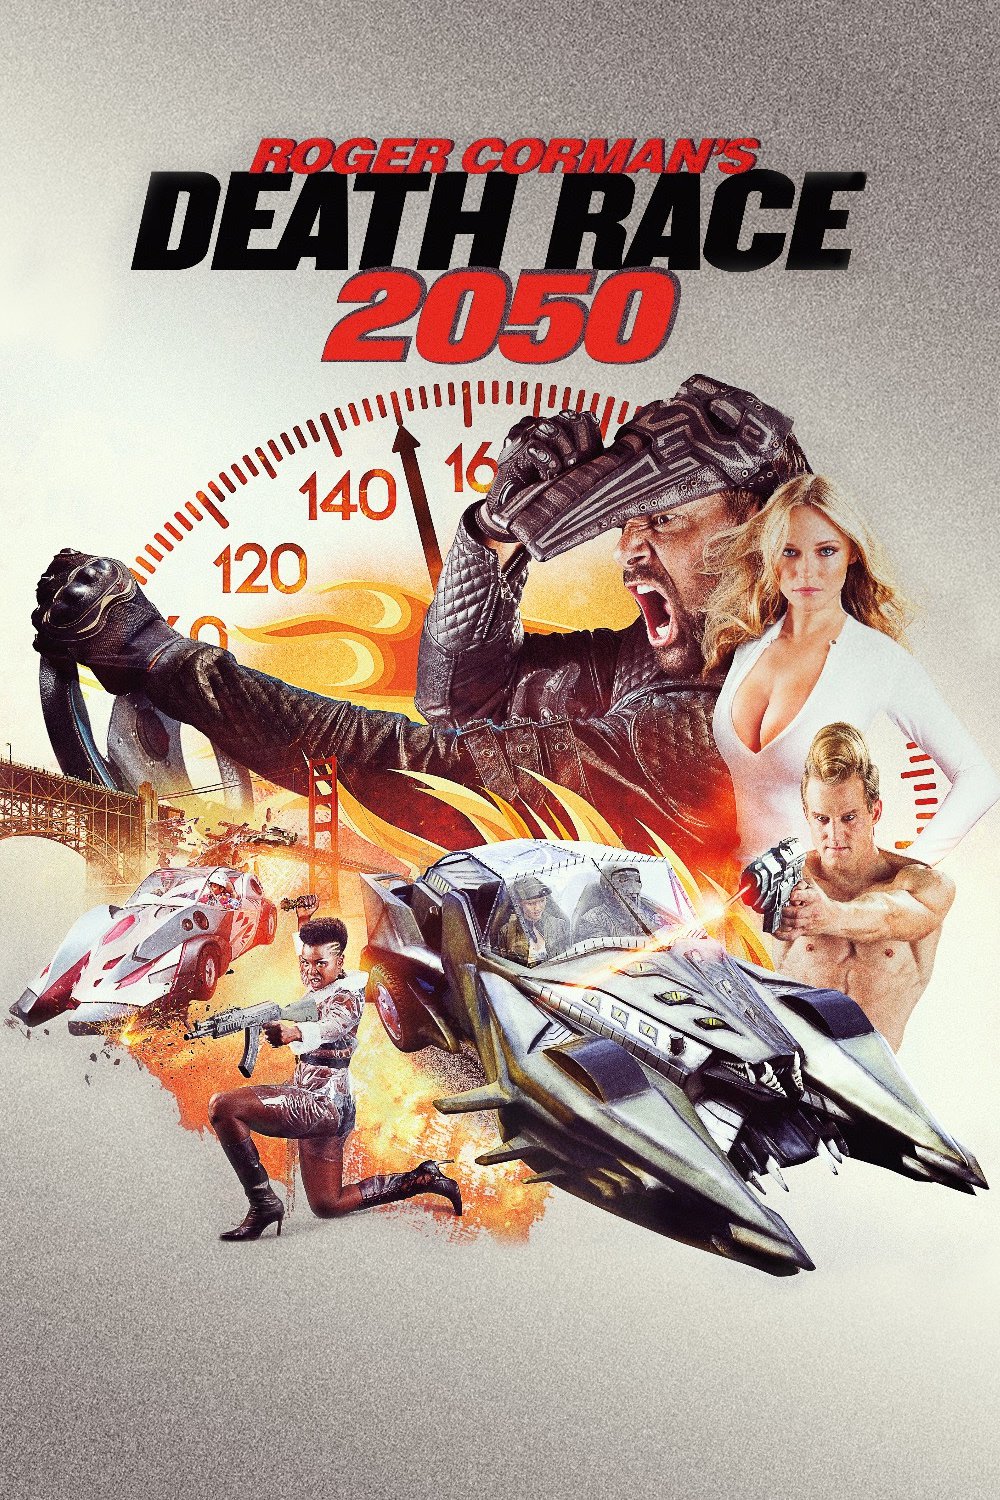 Poster for the movie "Death Race 2050"